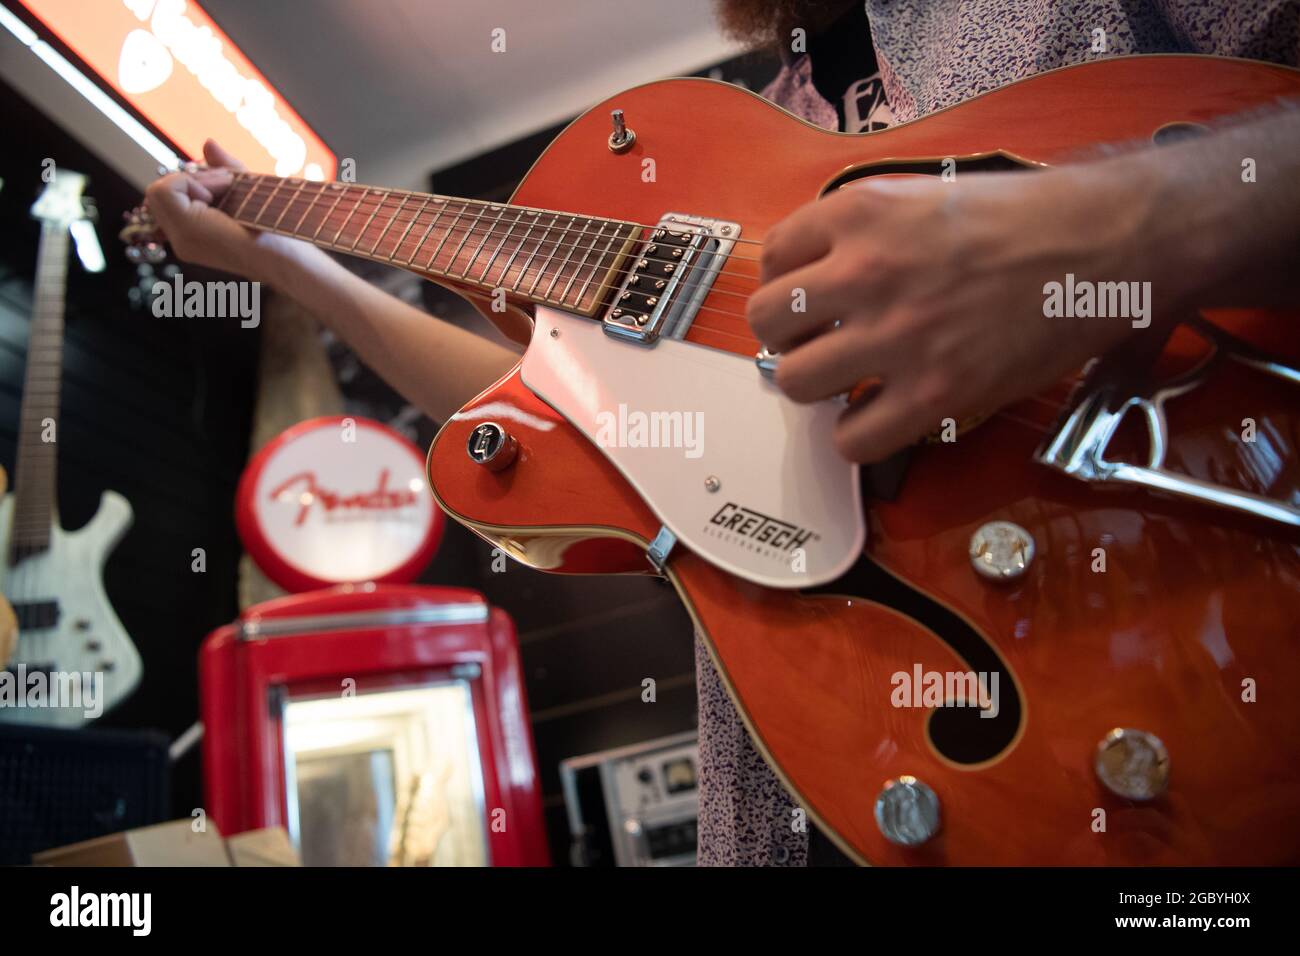 Berlin, Germany. 05th Aug, 2021. A man plays a left-handed guitar in a guitar  shop. Credit: Paul Zinken/dpa/Alamy Live News Stock Photo - Alamy